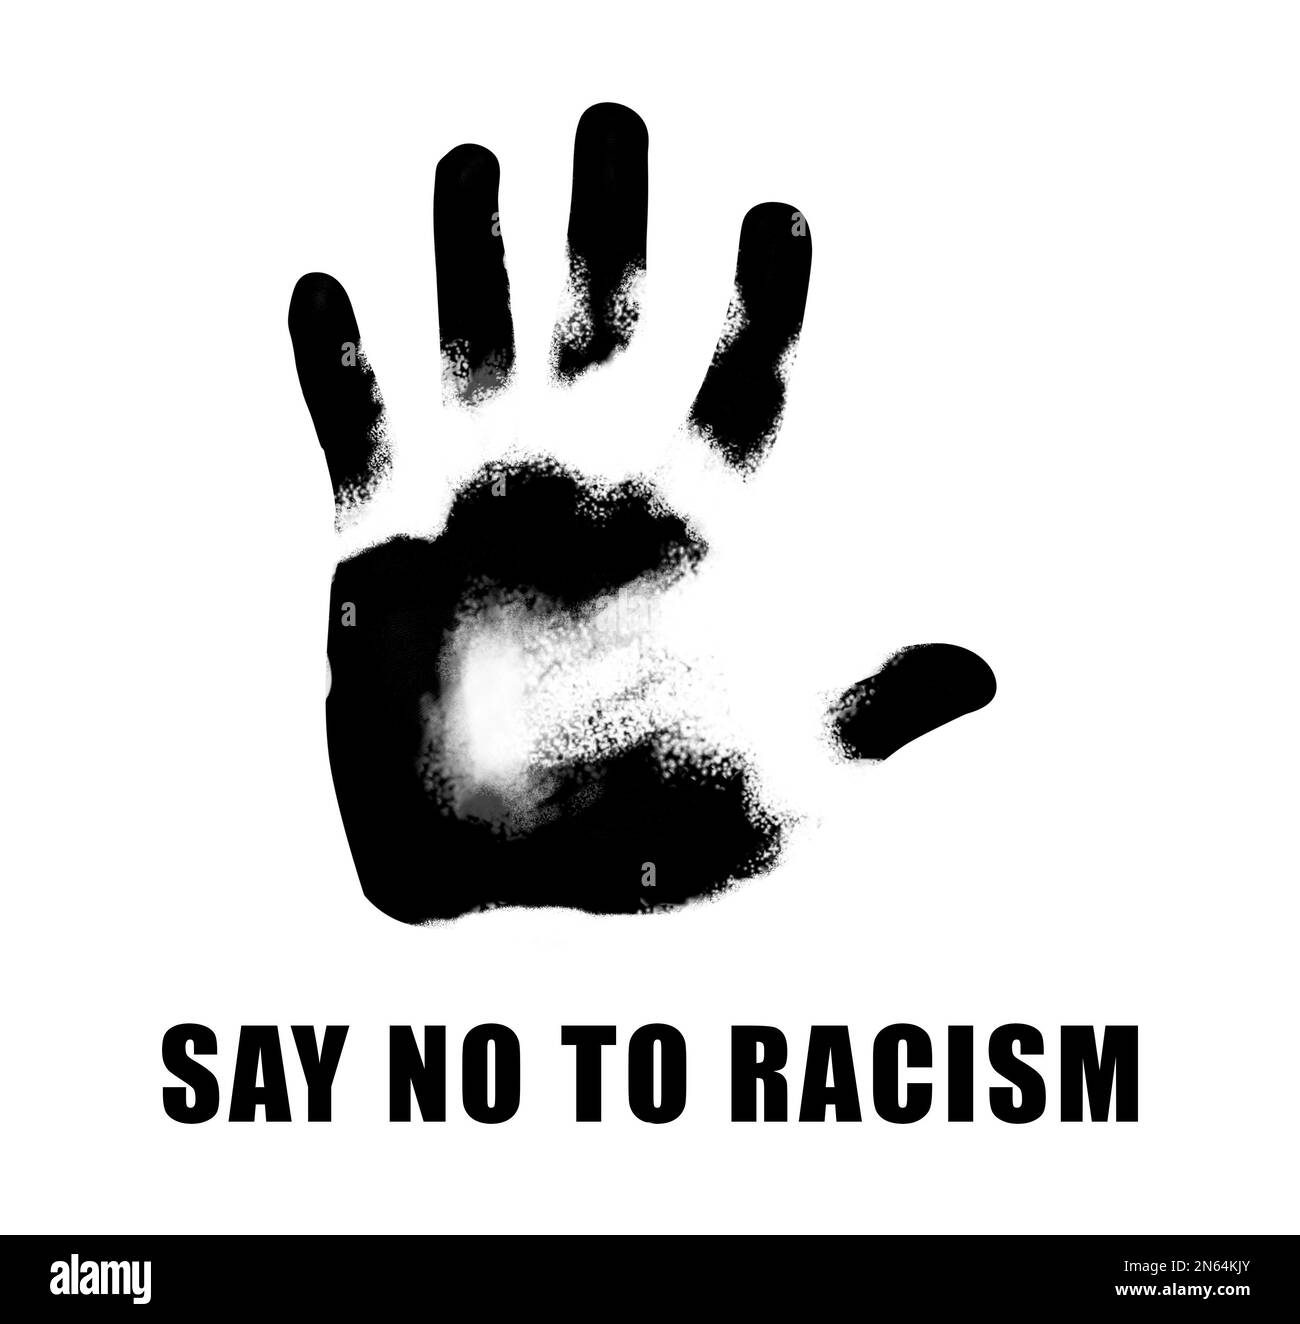 SAY NO TO RACISM. Black hand print on white background Stock Photo